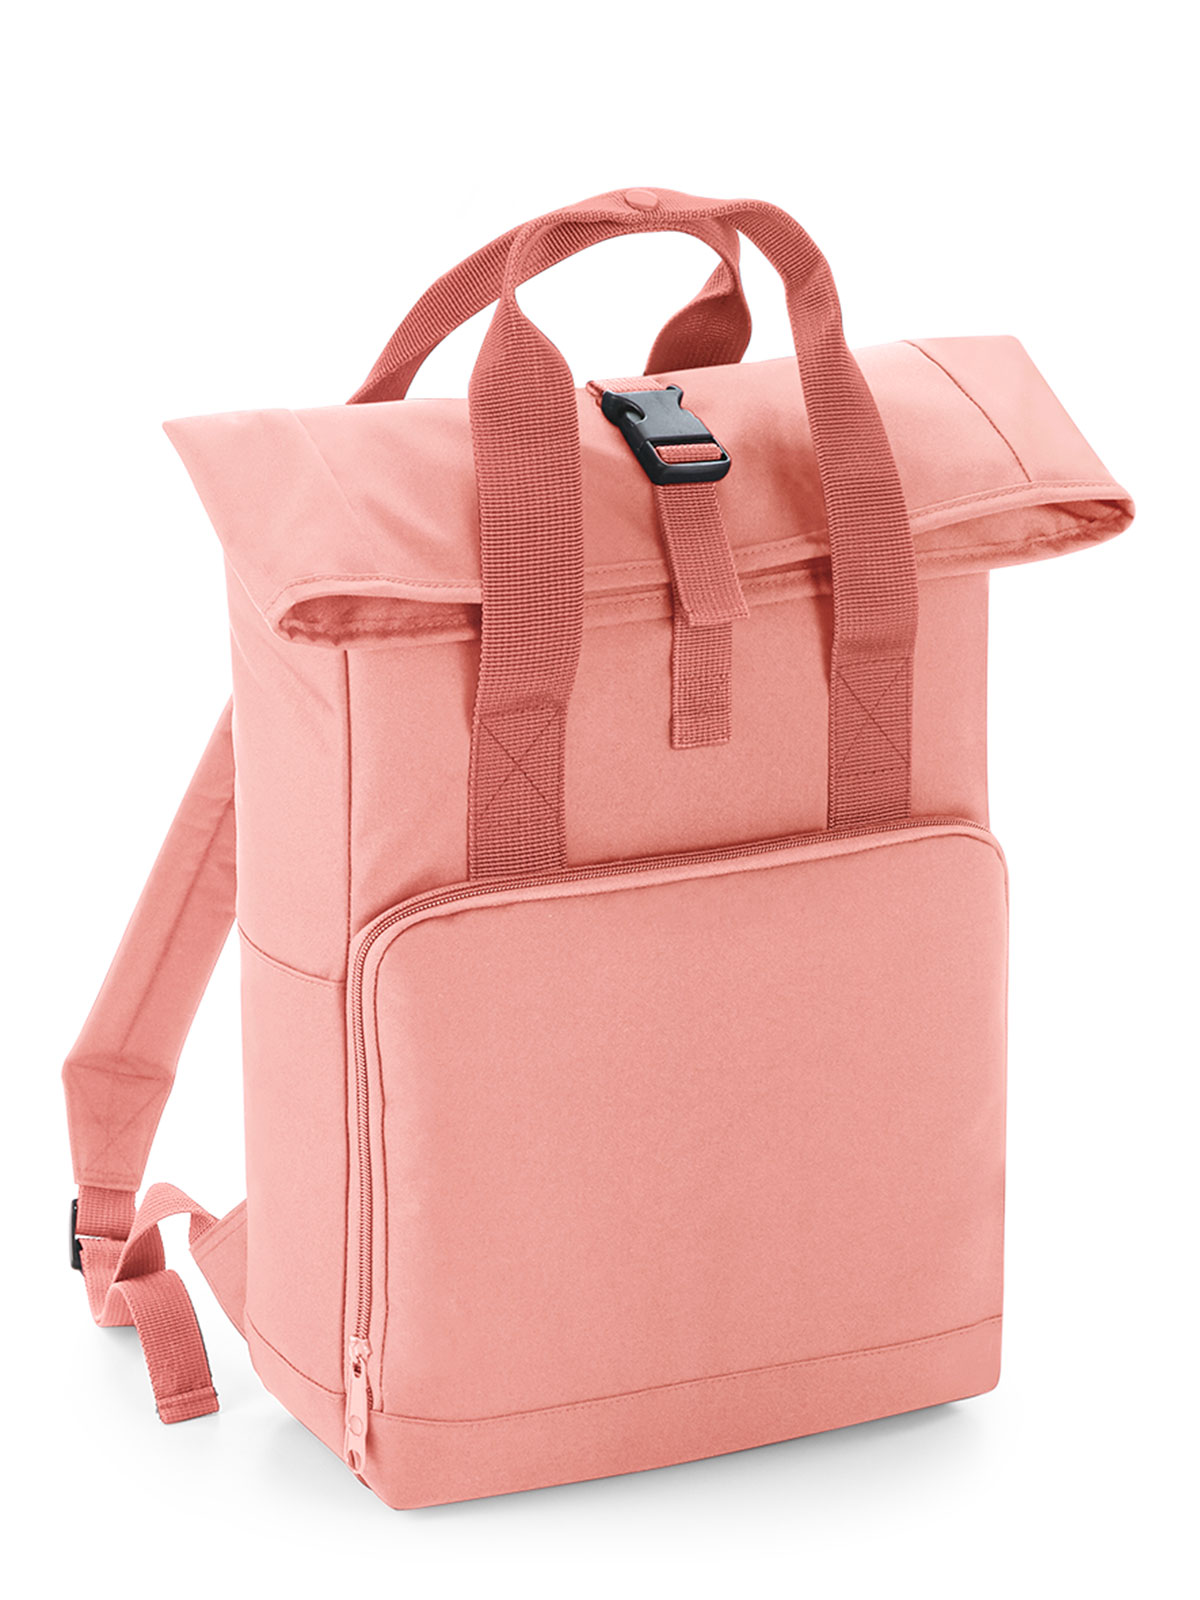 twin-handle-roll-top-backpack-blush.webp